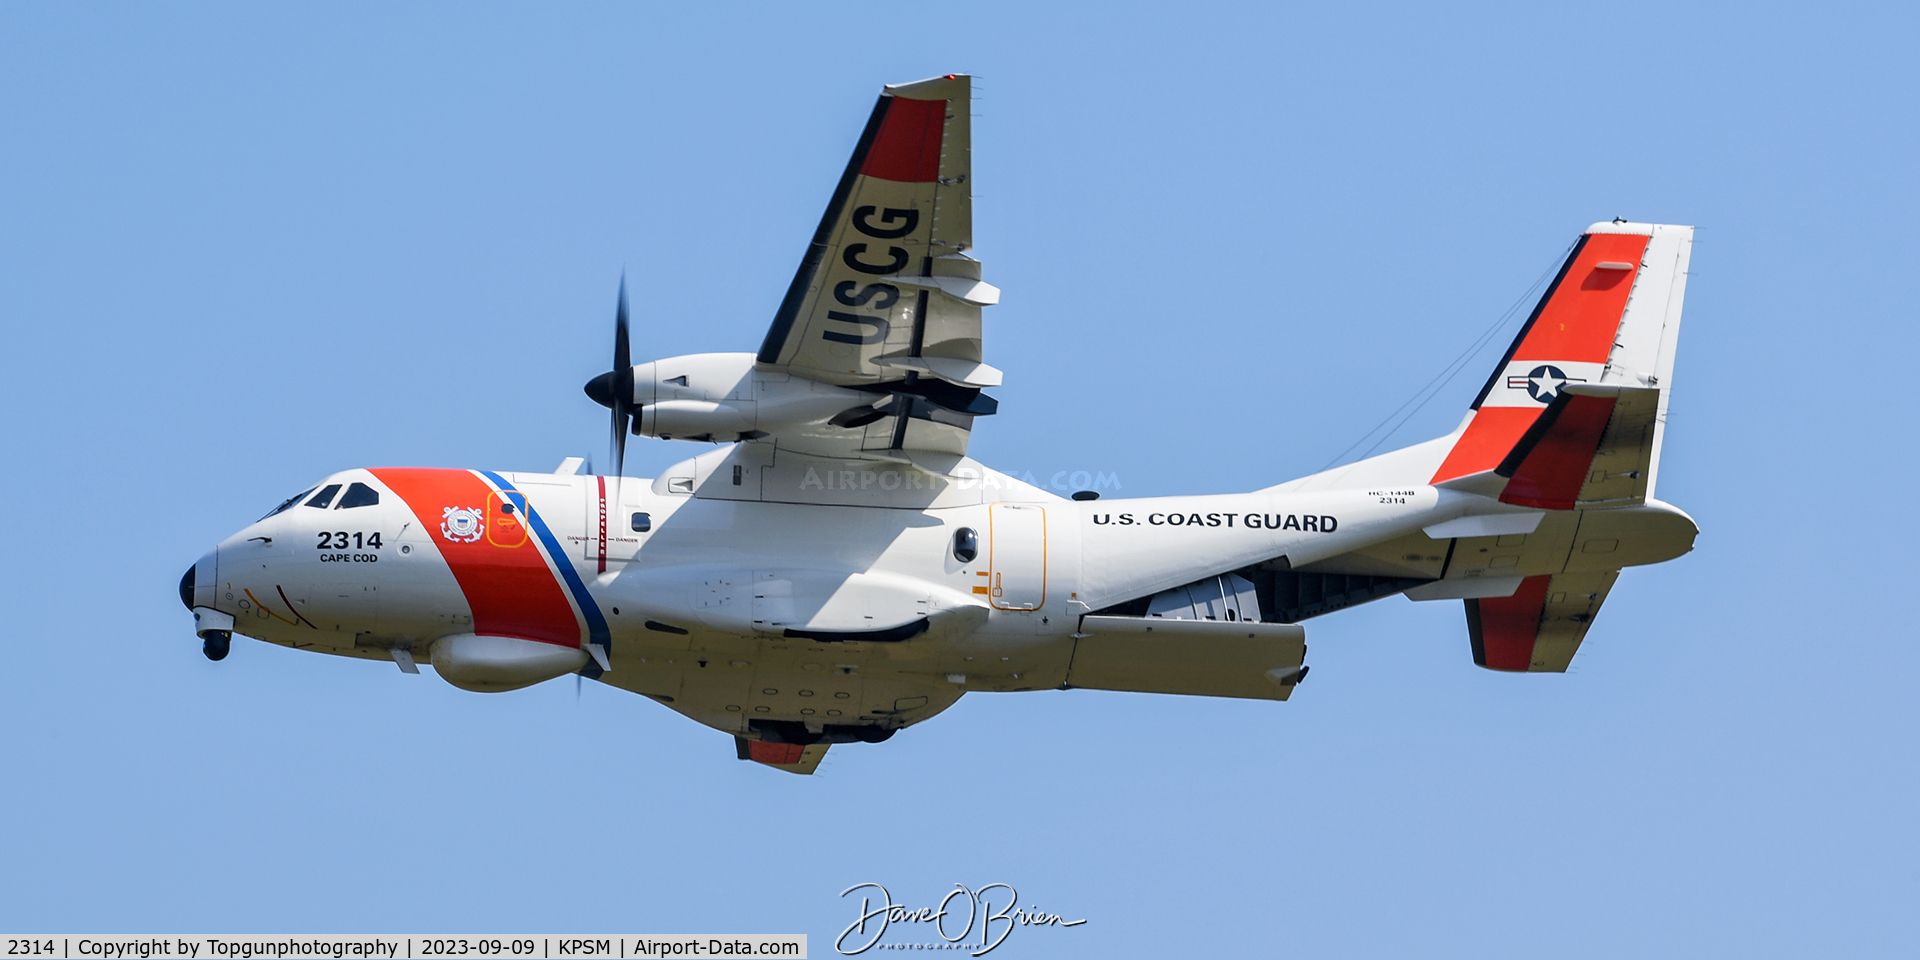 2314, 2014 Airtech HC-144A Ocean Sentry (CN-235M-300) C/N C203, USCG Ocen Sentry out of Cape Cod swings by for a fly by